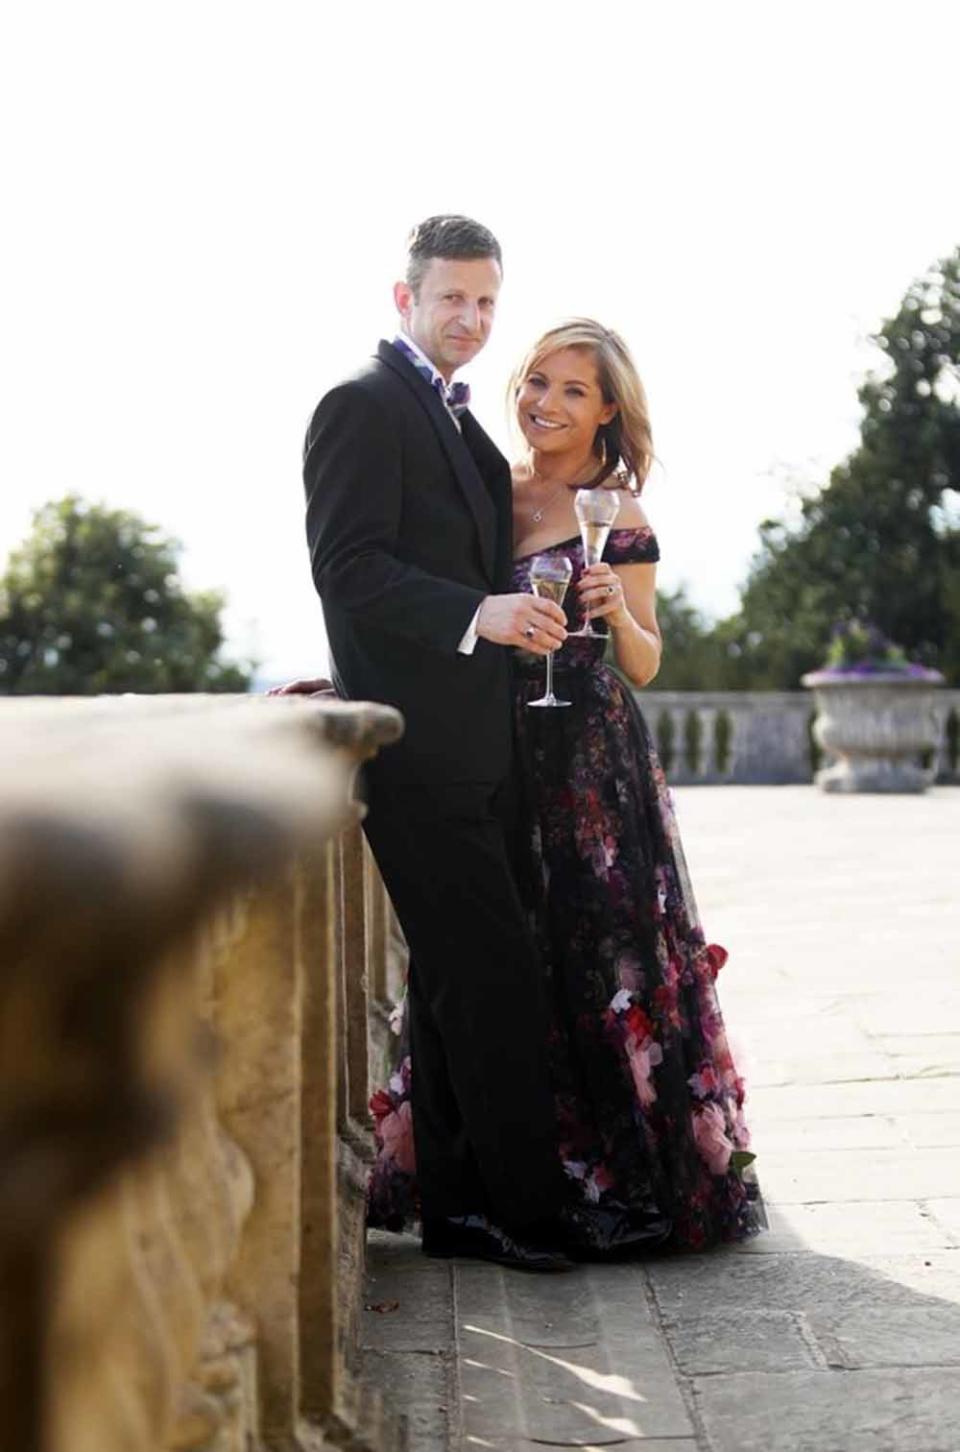 The couple saw a gap in the market for a coaching service for daters. (James Keates JK Photography/PA Real Life)